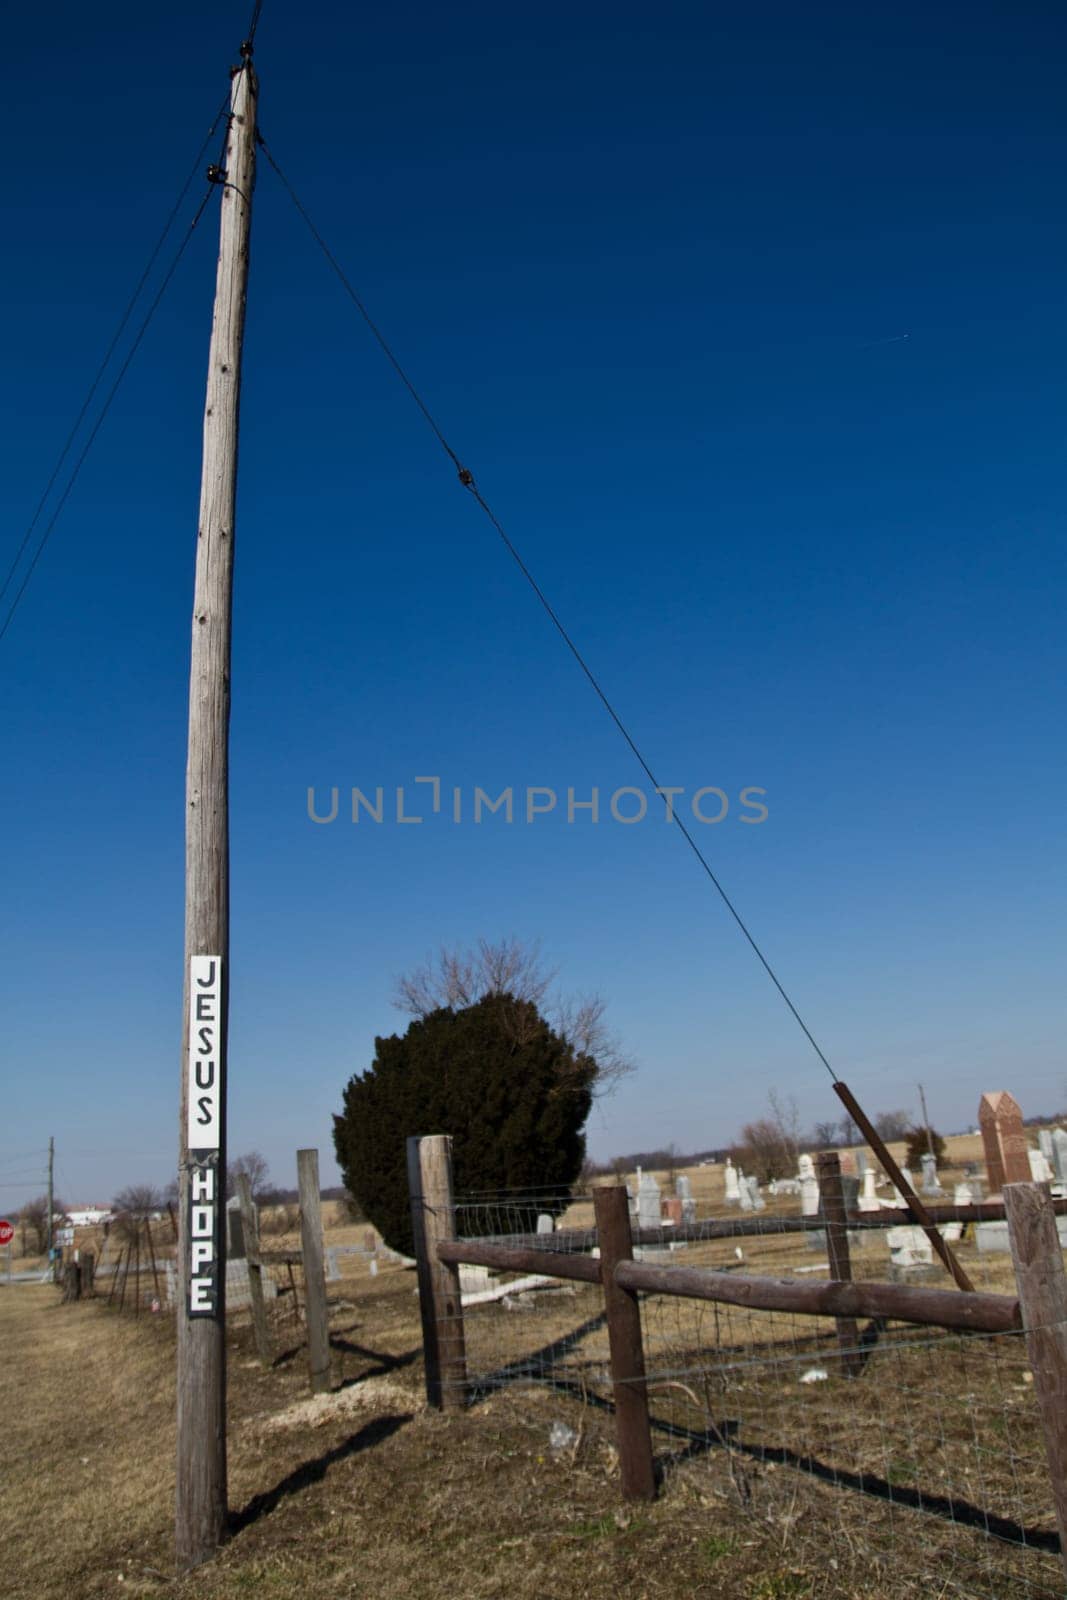 Rural Spirituality - Jesus Hope Signs on Utility Pole against Cemetery Backdrop by njproductions